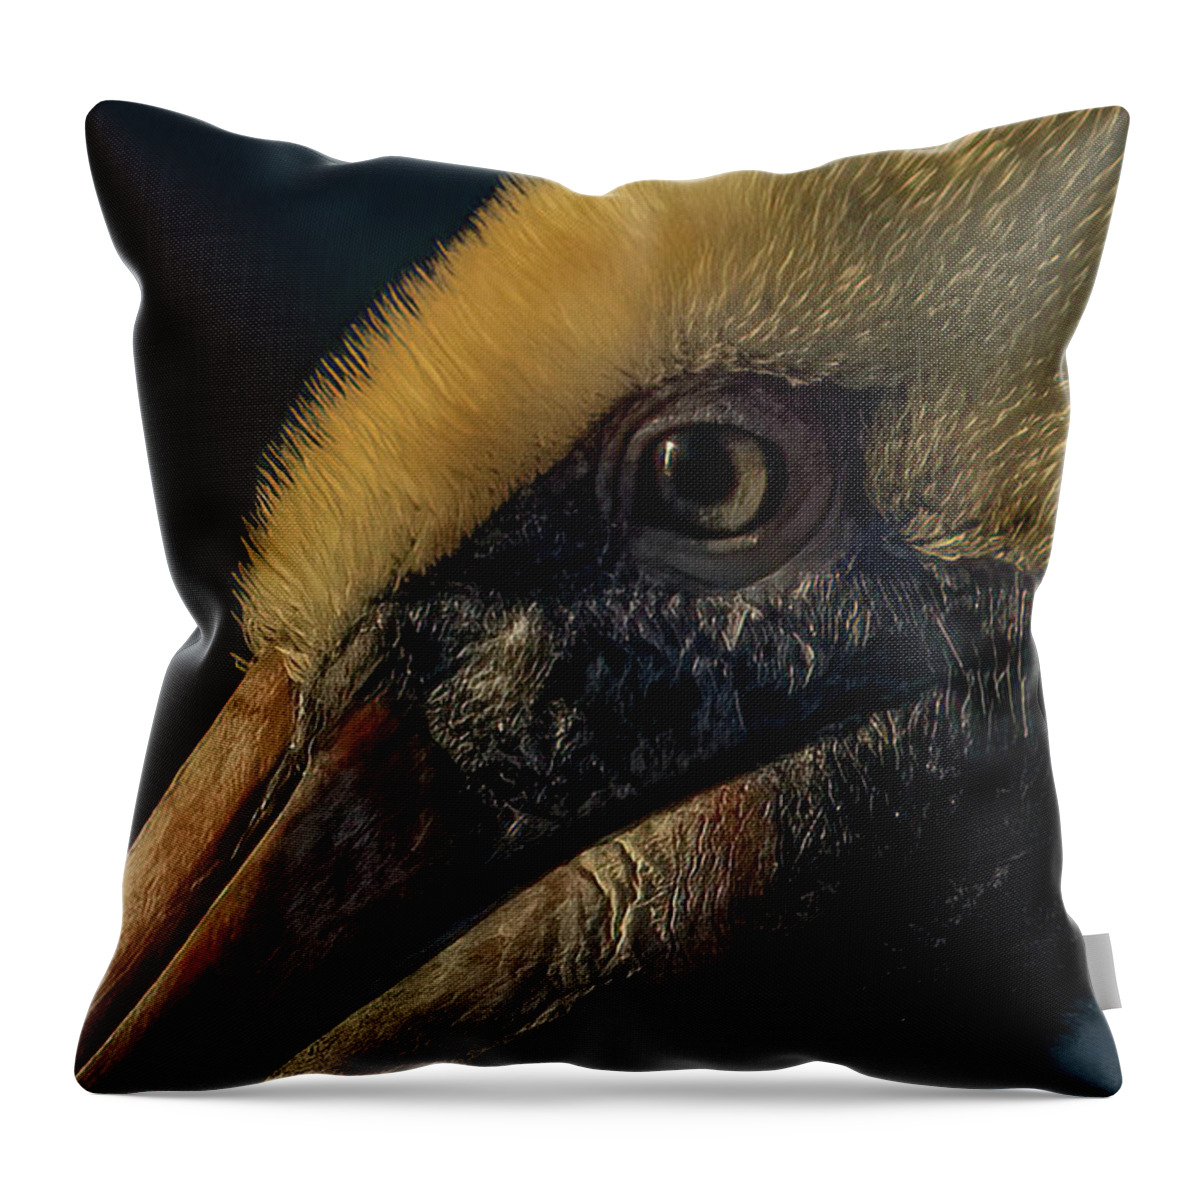 Pelican Throw Pillow featuring the photograph Looking Weathered by RD Allen